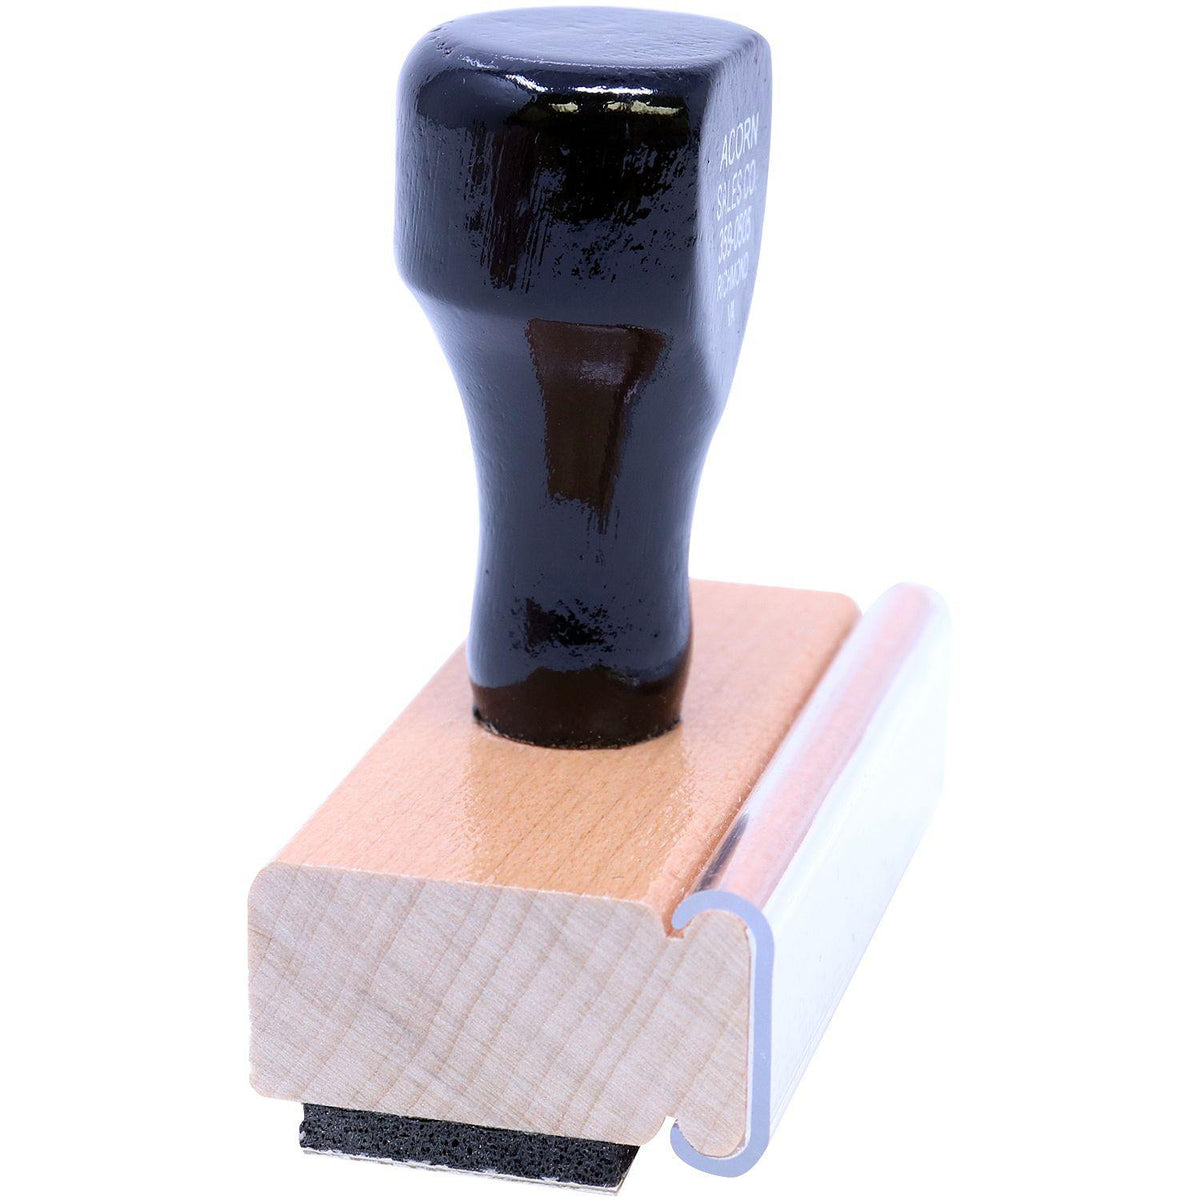 Side View of Large Insurance Rubber Stamp at an Angle